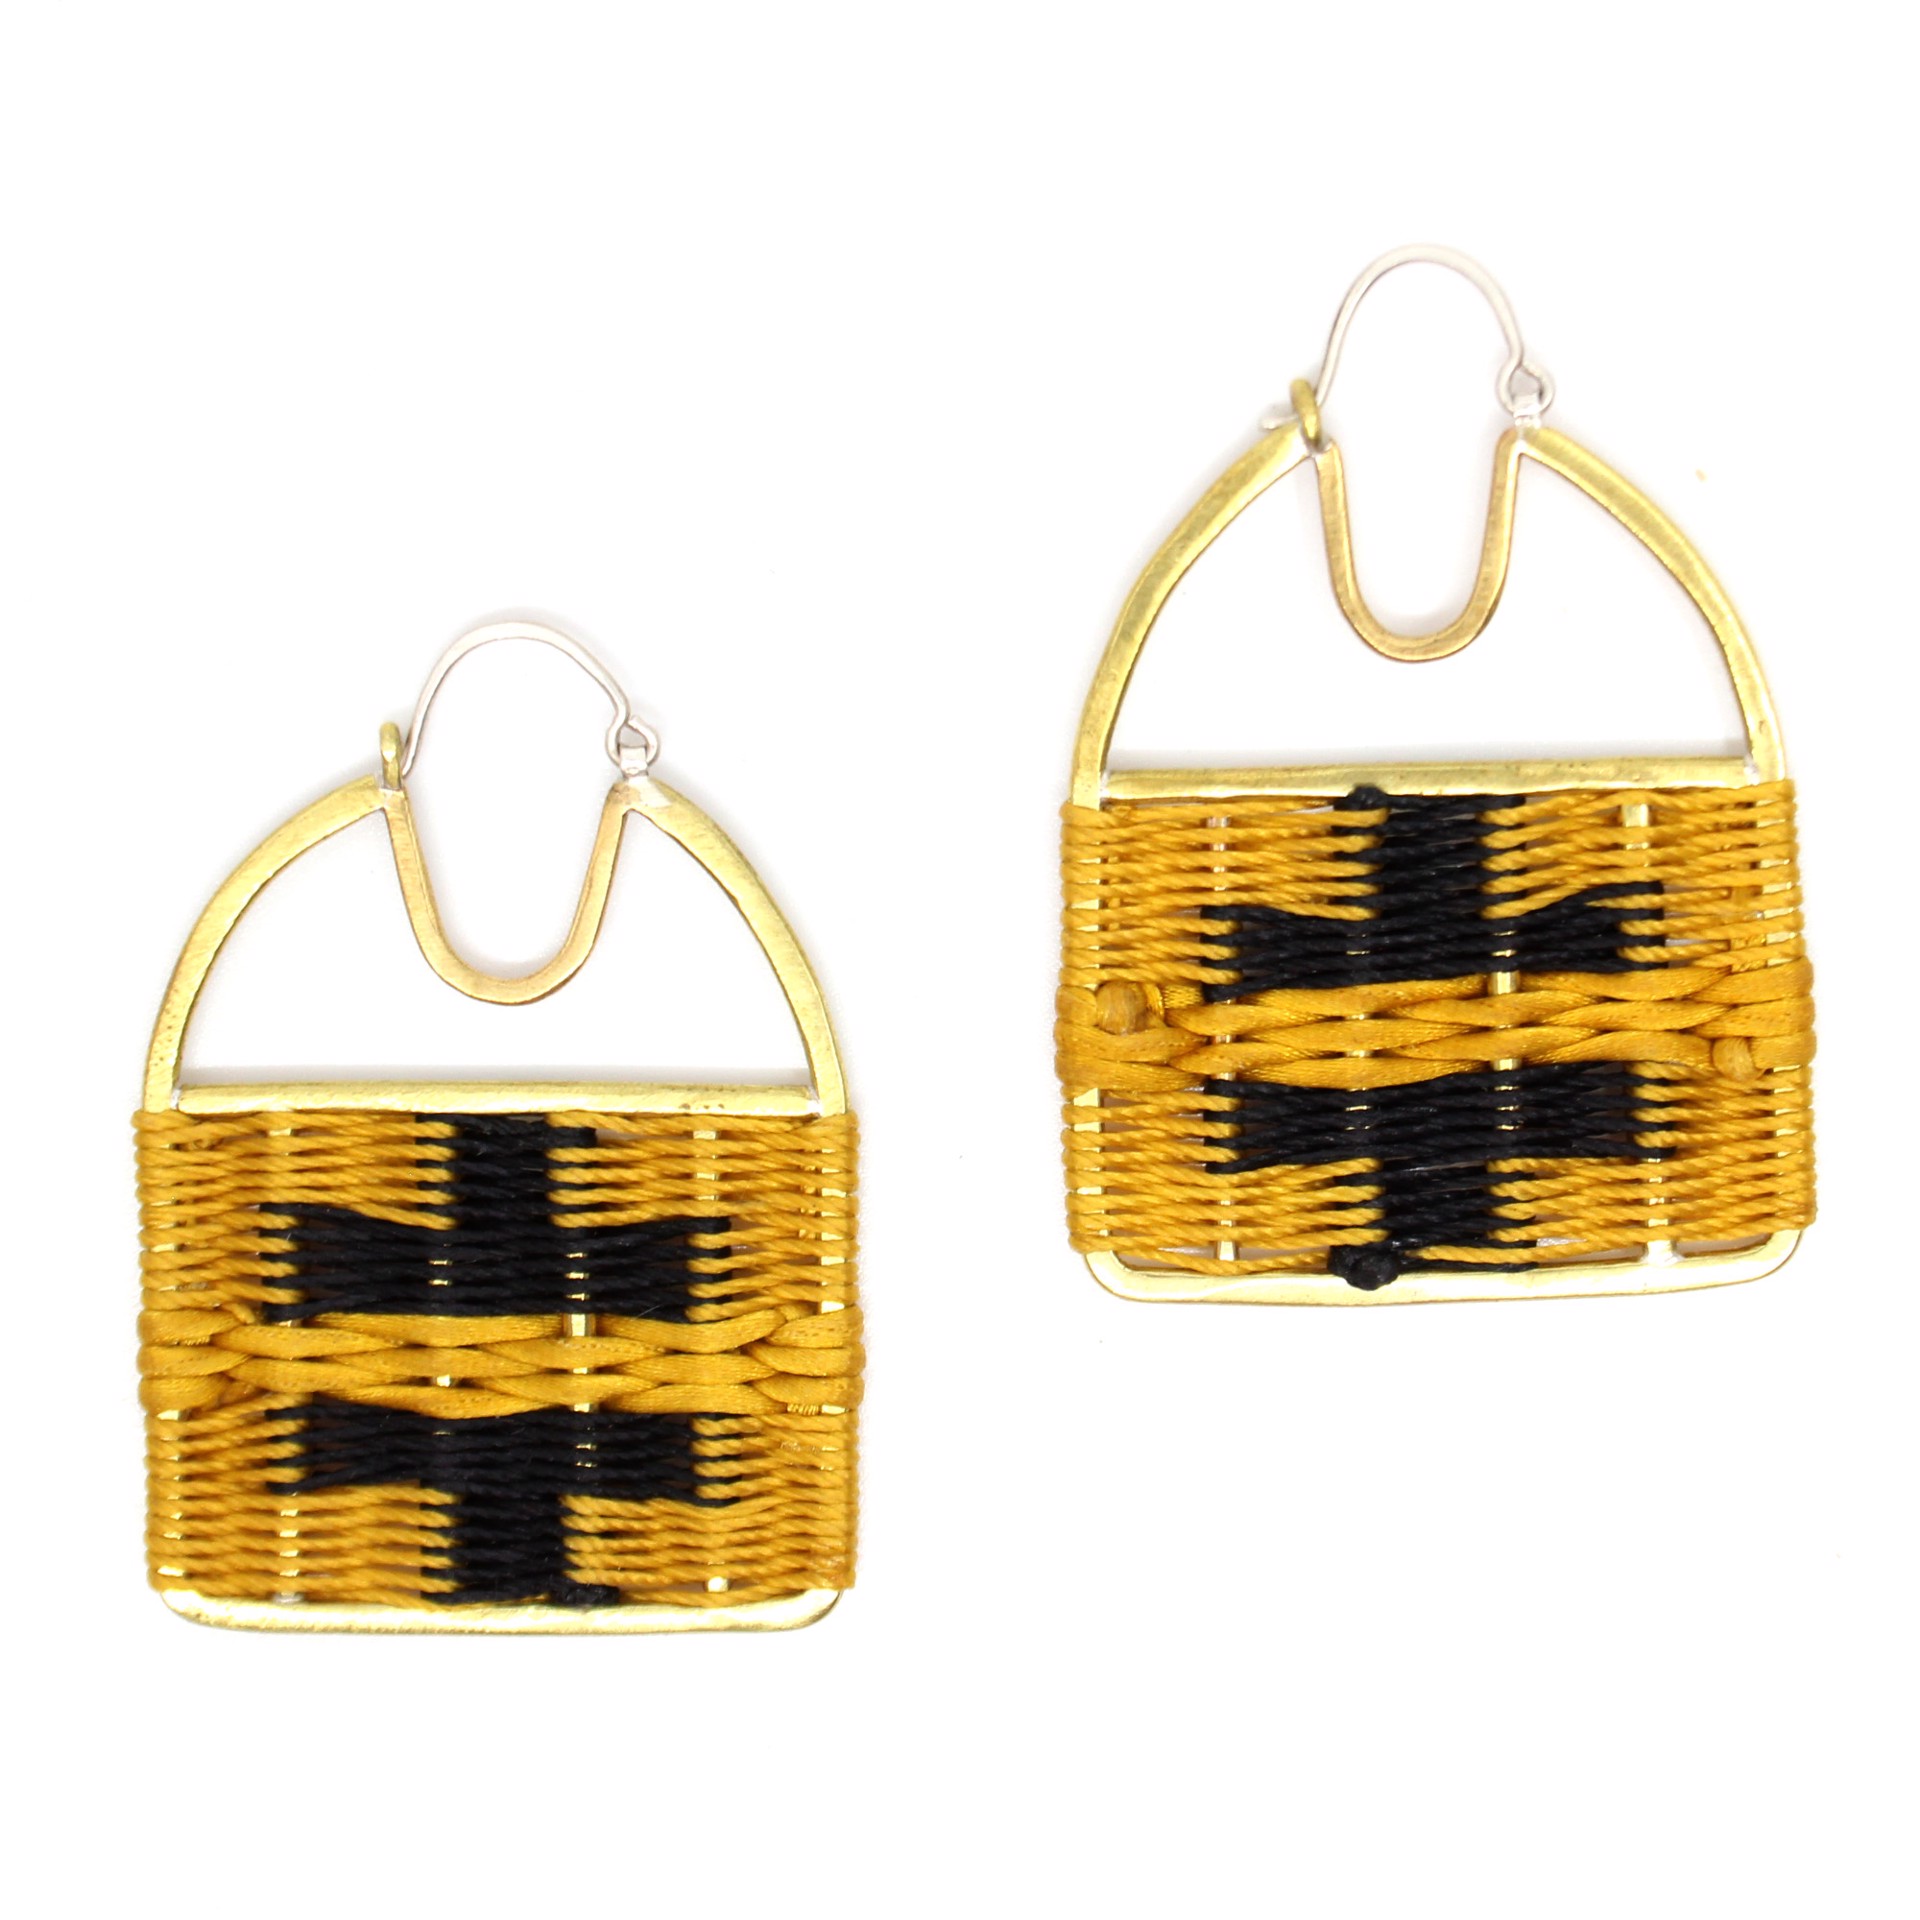 Diana earrings (gold + black) by Flag Mountain Jewelry